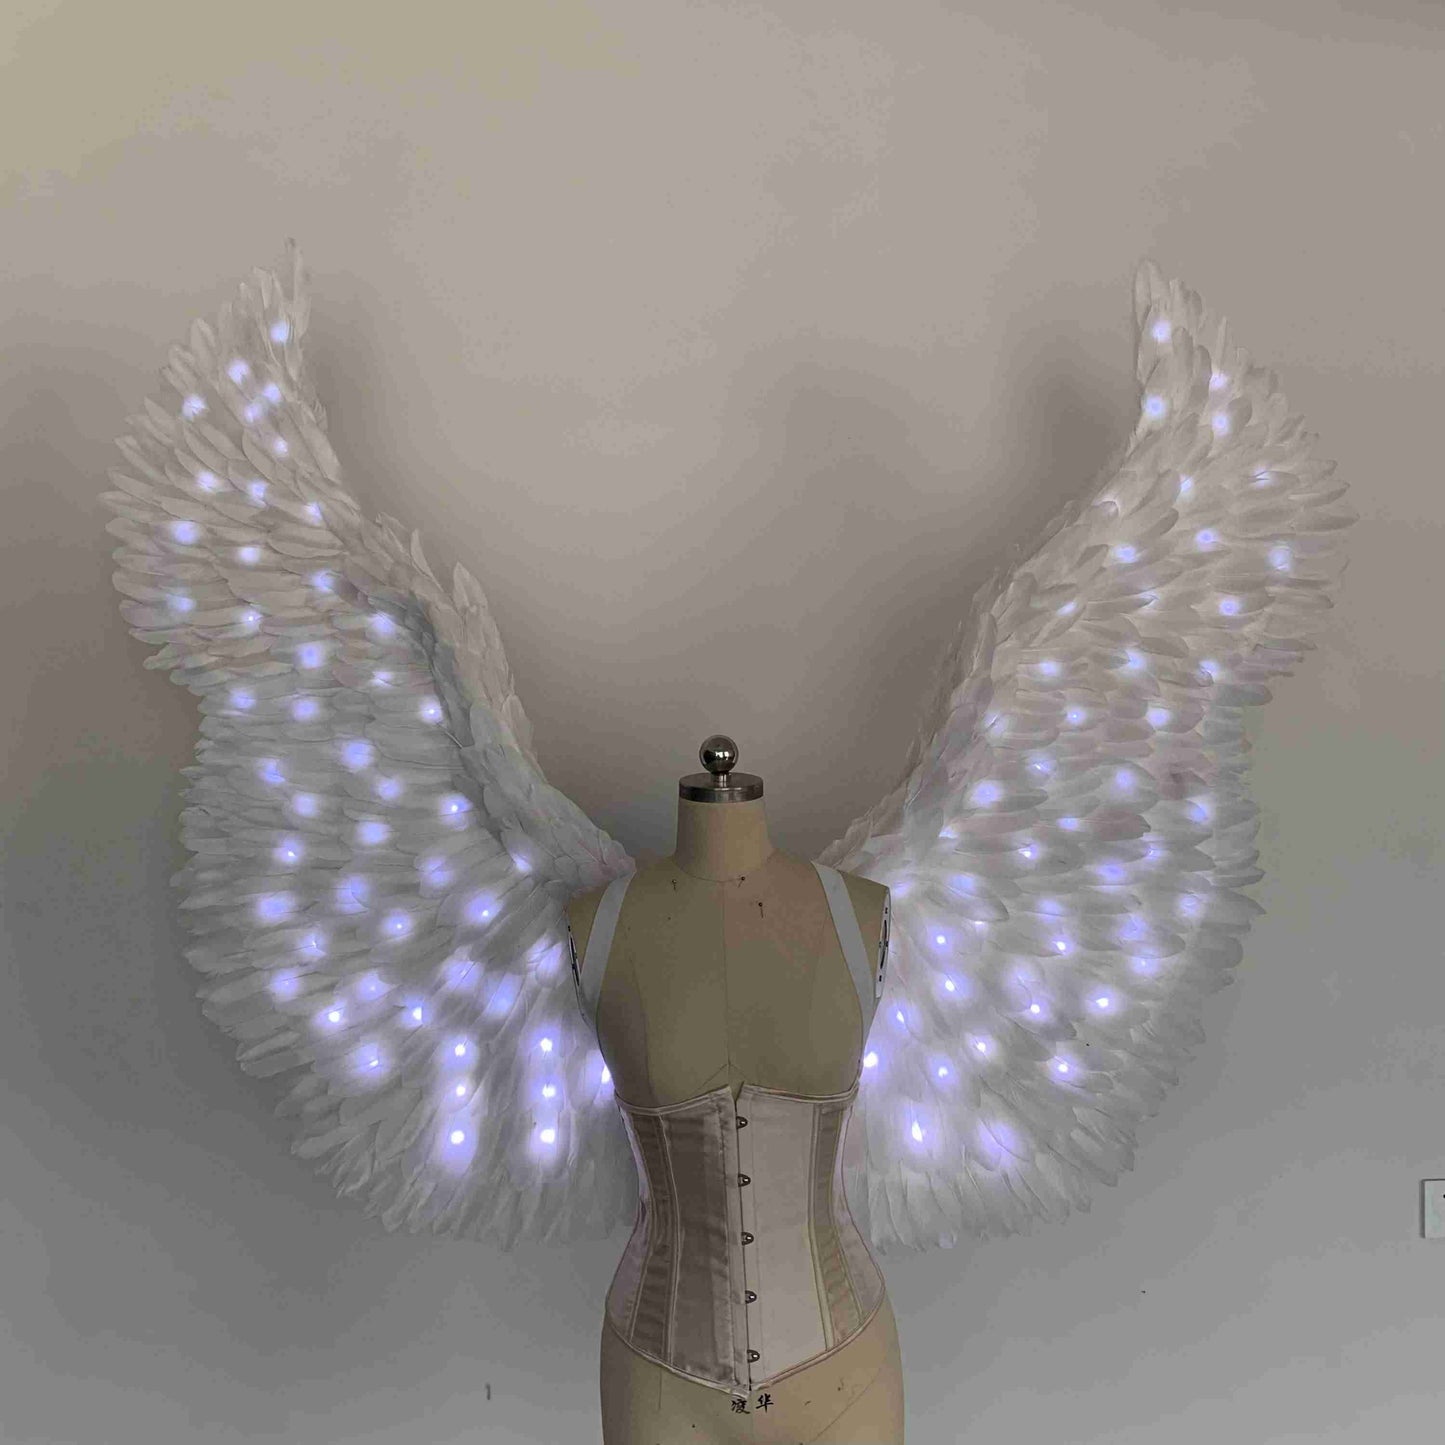 Our white color angel wings from the front. Made from goose feathers with LED lights inside. Wings for angel costume. Suitable for photoshoots.